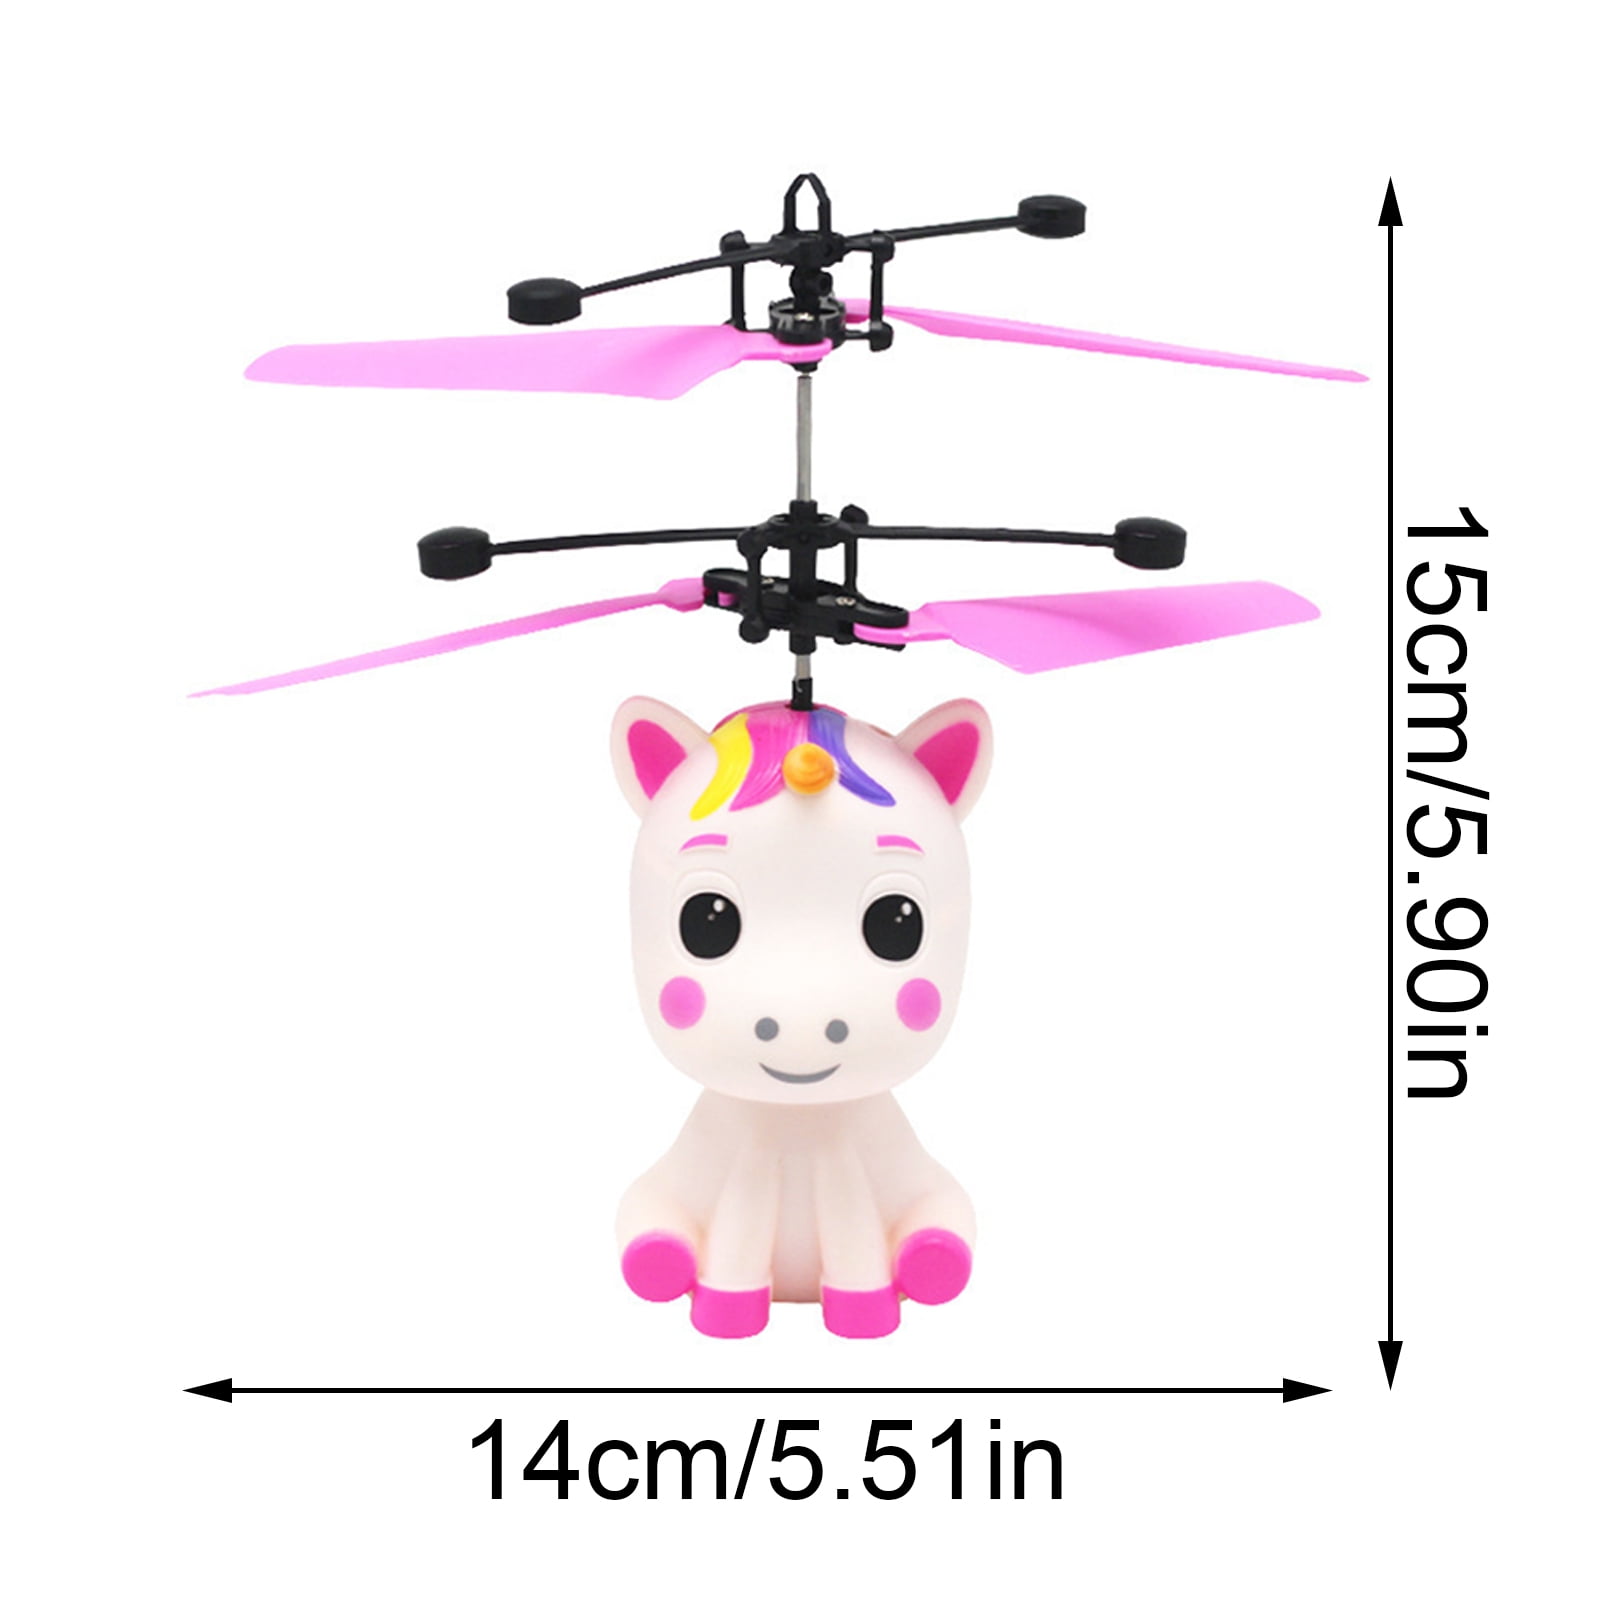 Ynanimery Unicorn Toys for Girls Age 4-6 7 8 9 Teens Birthday, Remote  Control Helicopter Unicorn Drone Toys for Beginner Kids Indoor Outdoor Play